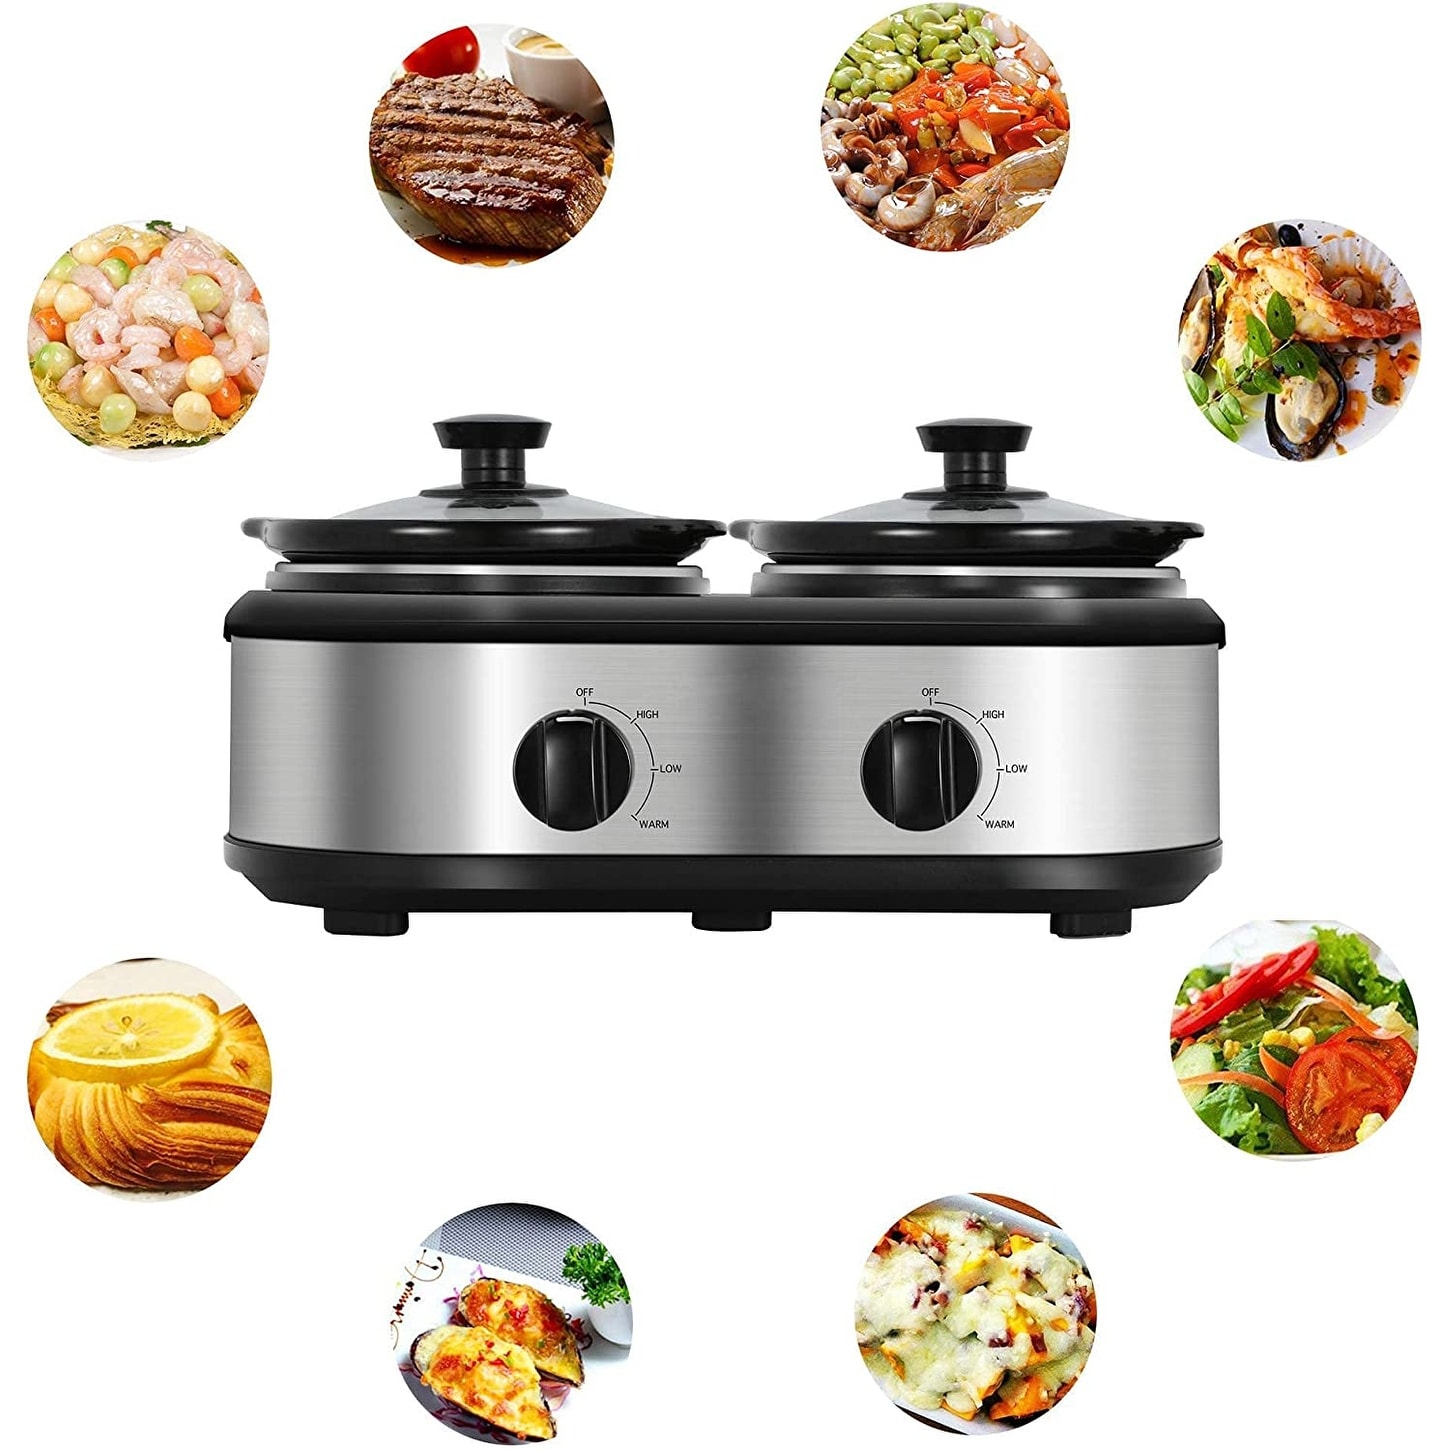 https://ak1.ostkcdn.com/images/products/is/images/direct/5994d58aa98ee2fe1db7d64c97d9c880f468e609/Triple-Slow-Cooker%2C-3%C3%971.5-QT-Buffet-Servers-and-Warmers%2C-3-Pots-Buffet-Slow-Cooker-Adjustable-Temp.jpg